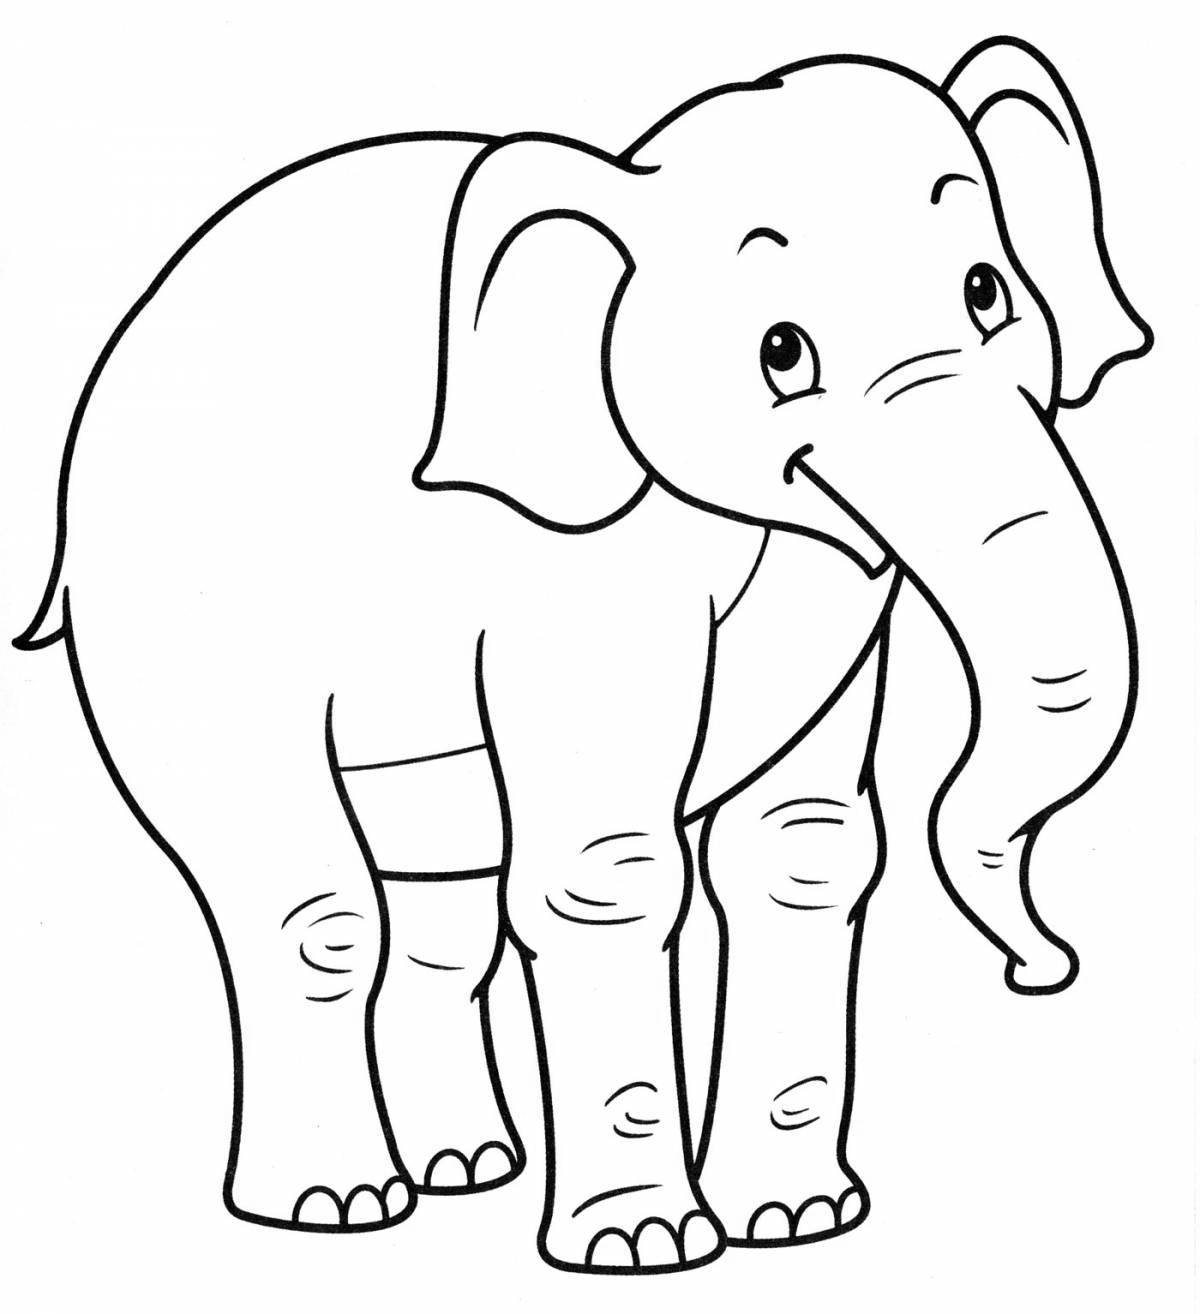 Cute elephant coloring pages for kids